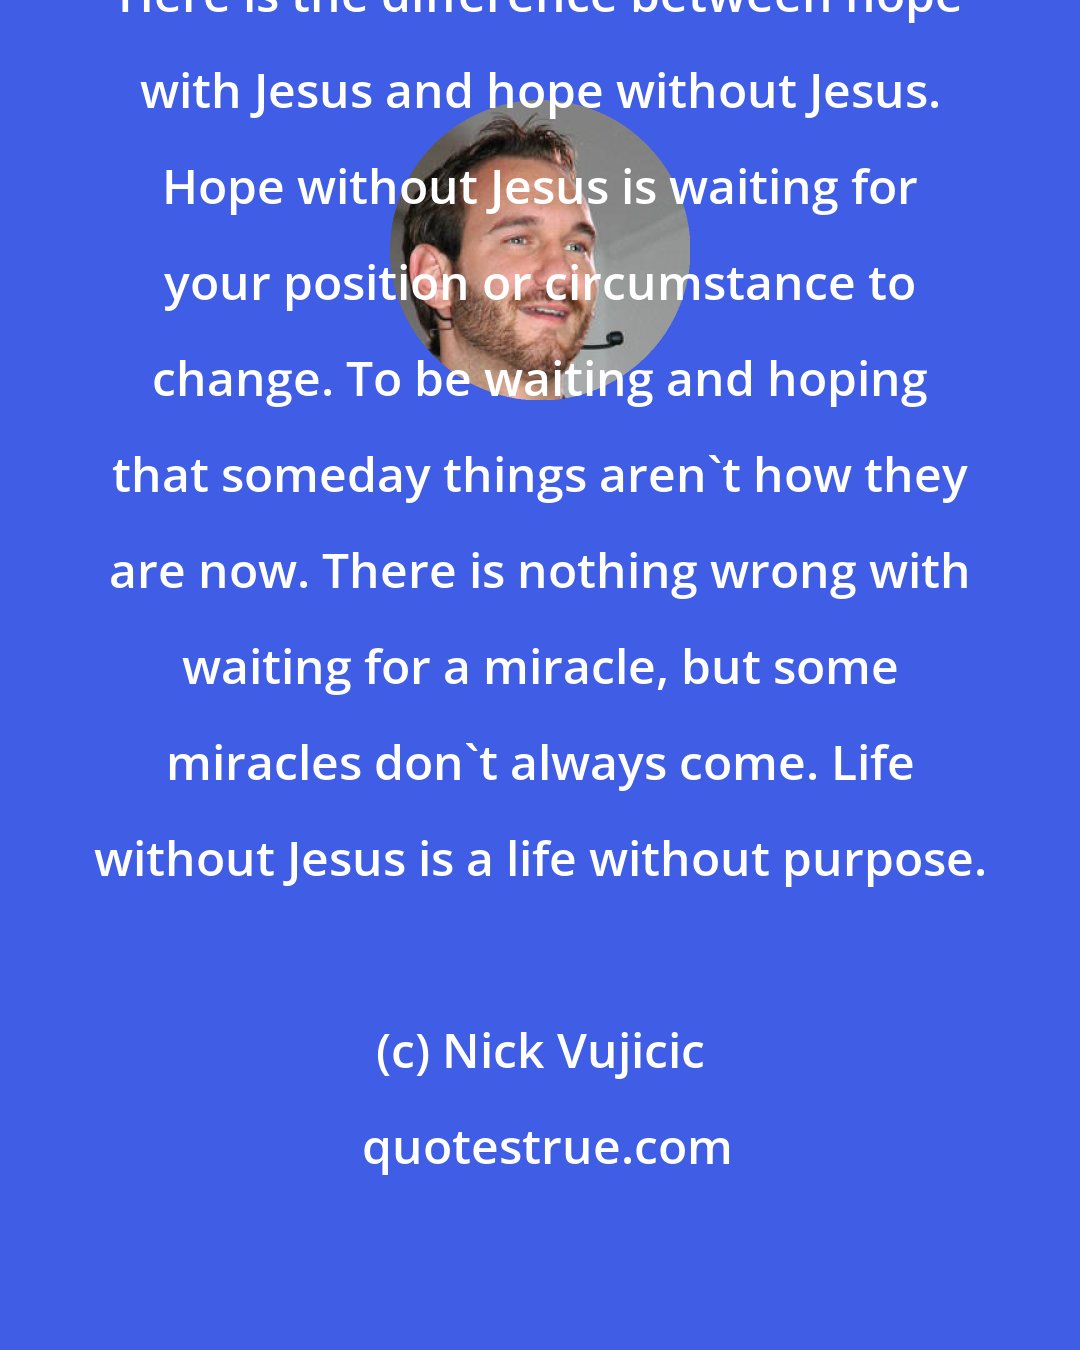 Nick Vujicic: Here is the difference between hope with Jesus and hope without Jesus. Hope without Jesus is waiting for your position or circumstance to change. To be waiting and hoping that someday things aren't how they are now. There is nothing wrong with waiting for a miracle, but some miracles don't always come. Life without Jesus is a life without purpose.